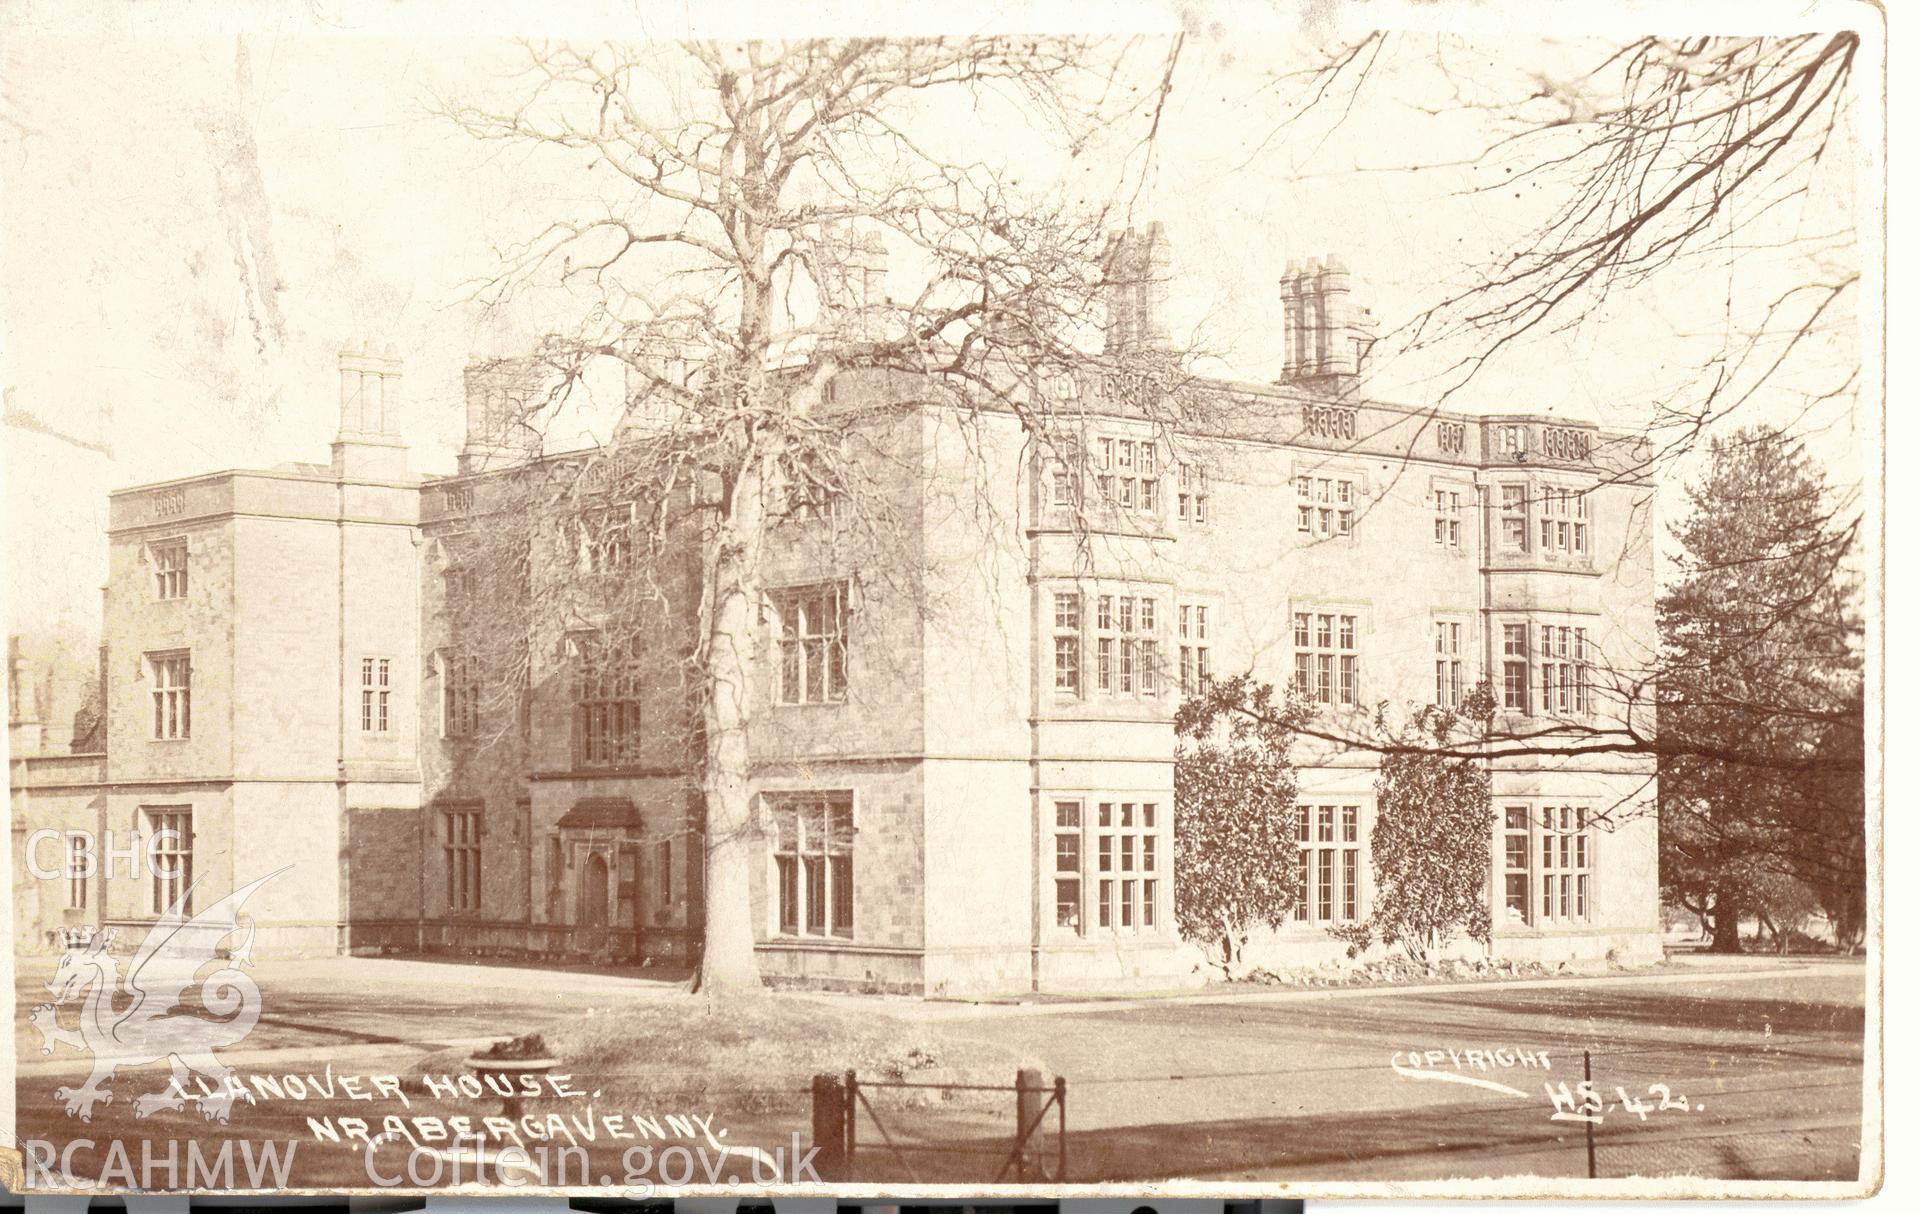 Digitised postcard image of Llanover House, Llanover, Copyright H.S. 42. Produced by Parks and Gardens Data Services, from an original item in the Peter Davis Collection at Parks and Gardens UK. We hold only web-resolution images of this collection, suitable for viewing on screen and for research purposes only. We do not hold the original images, or publication quality scans.